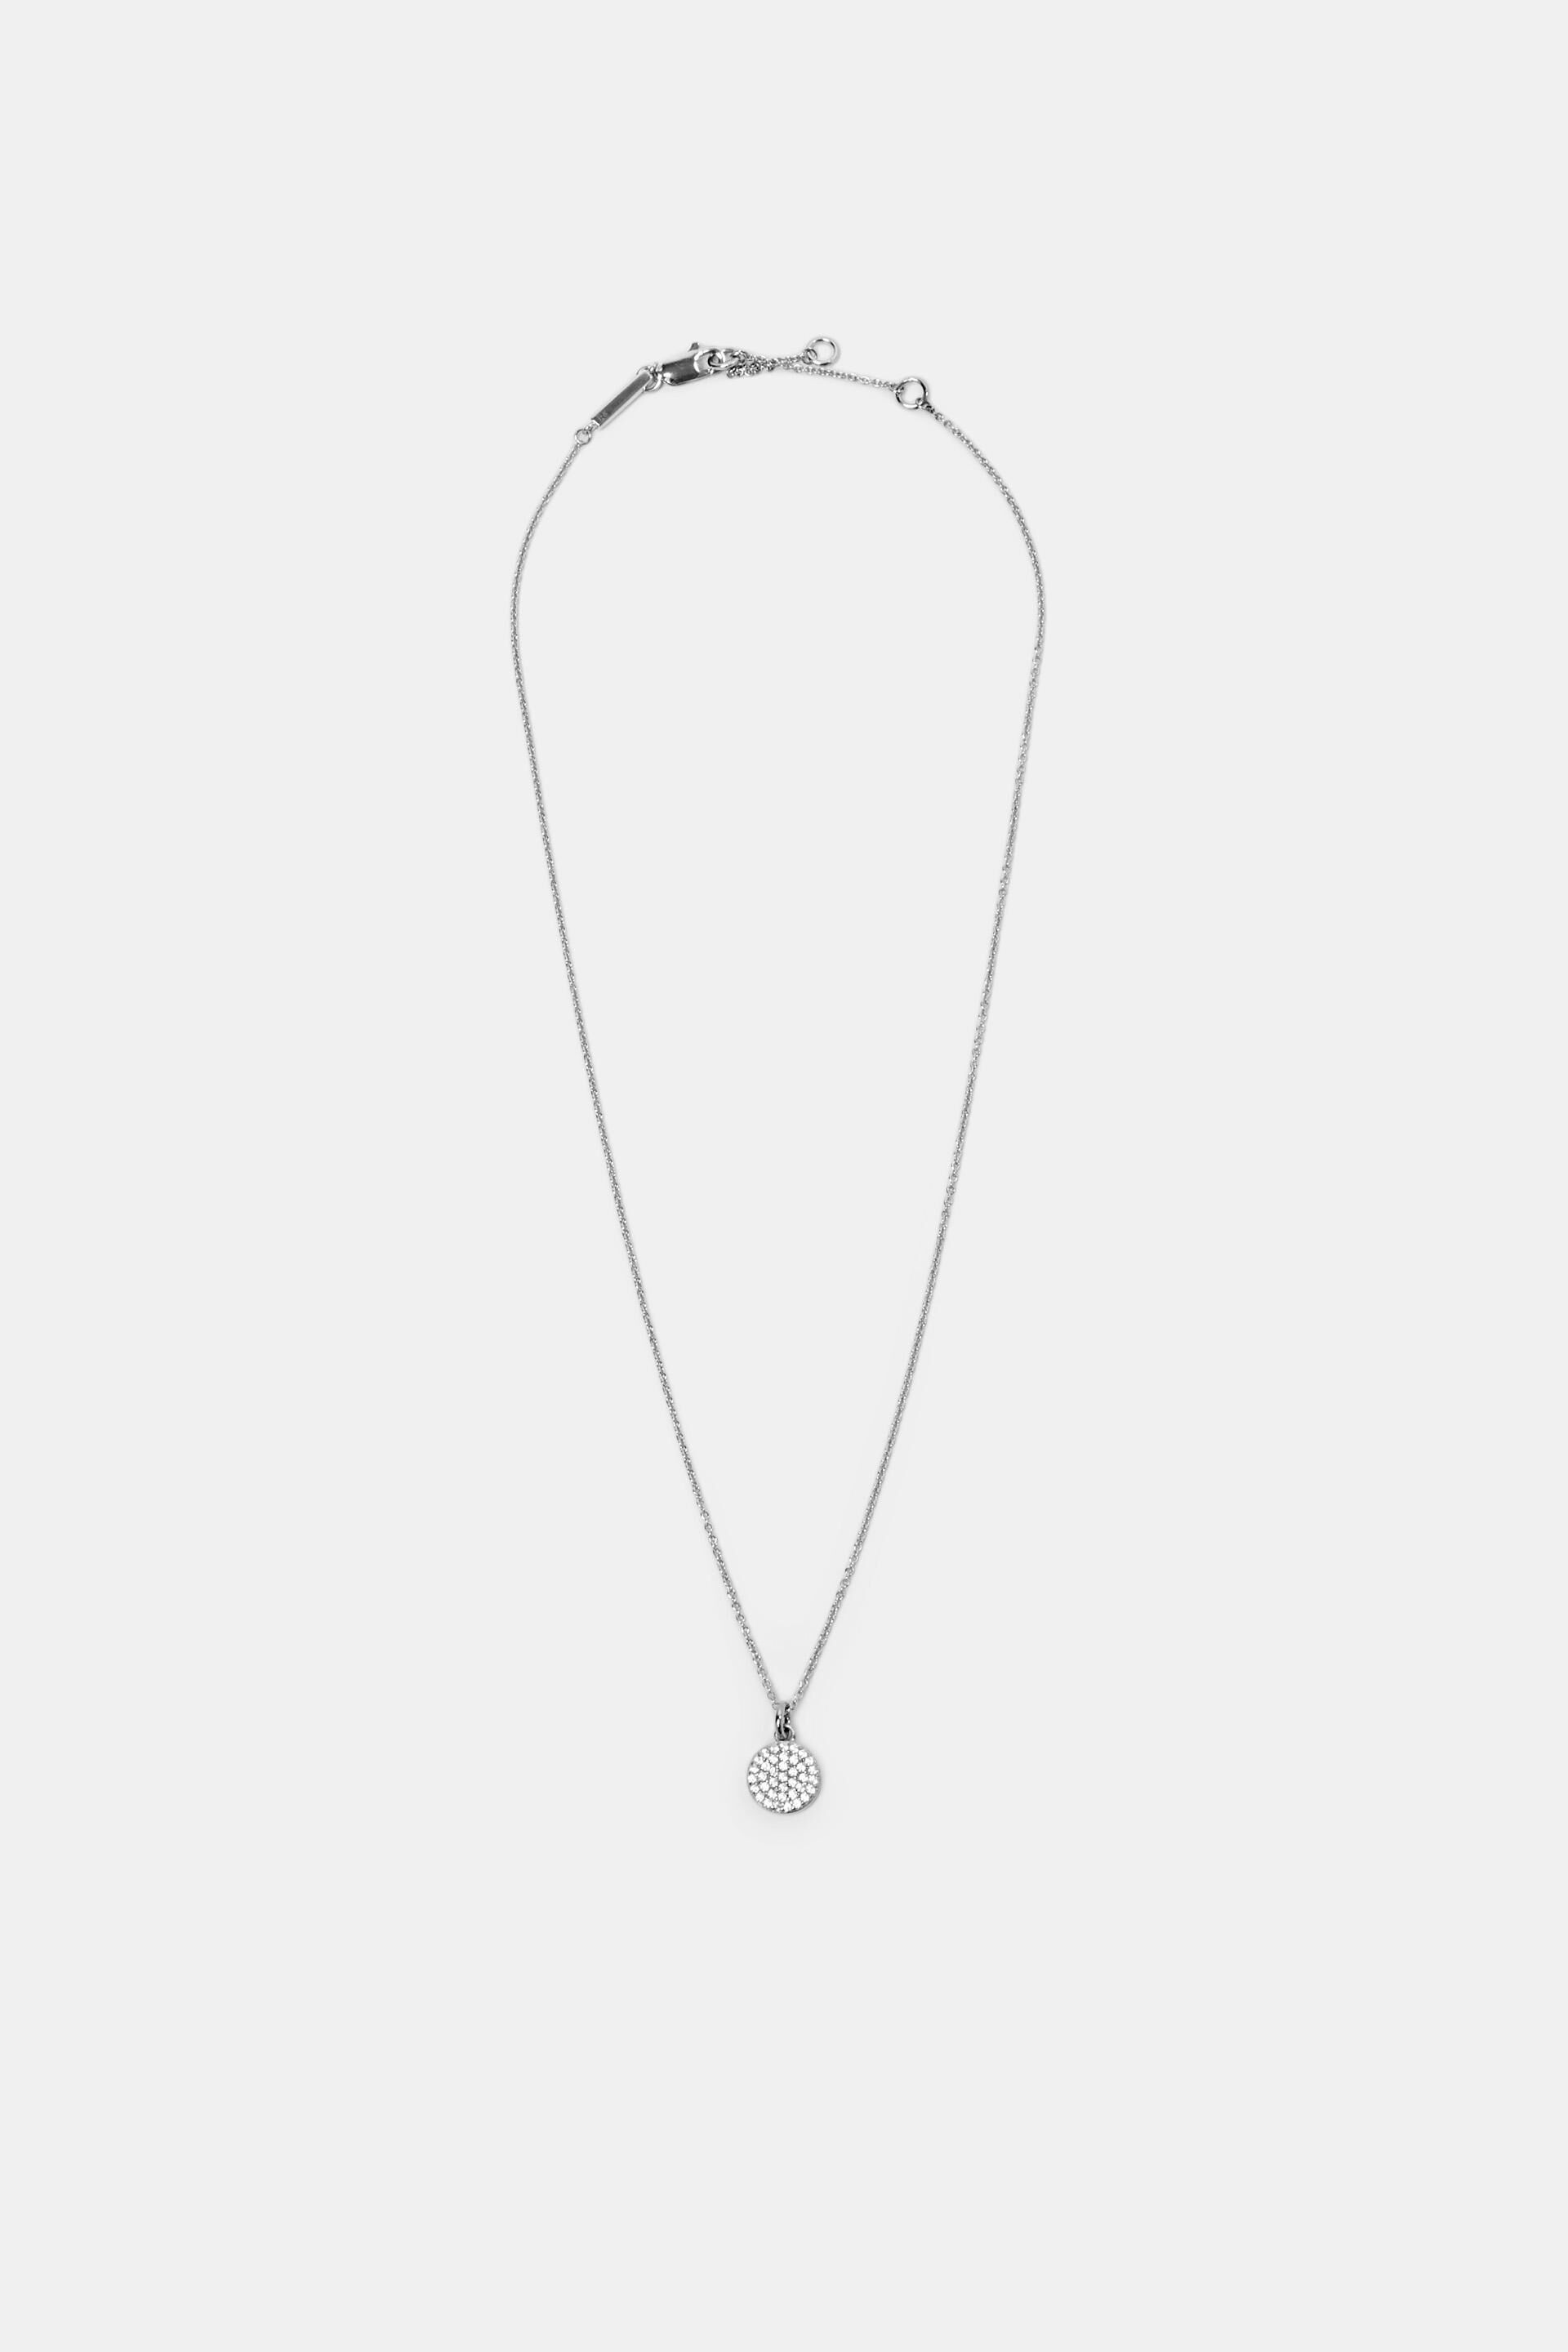 Esprit zirconia with sterling silver pendant, Necklace